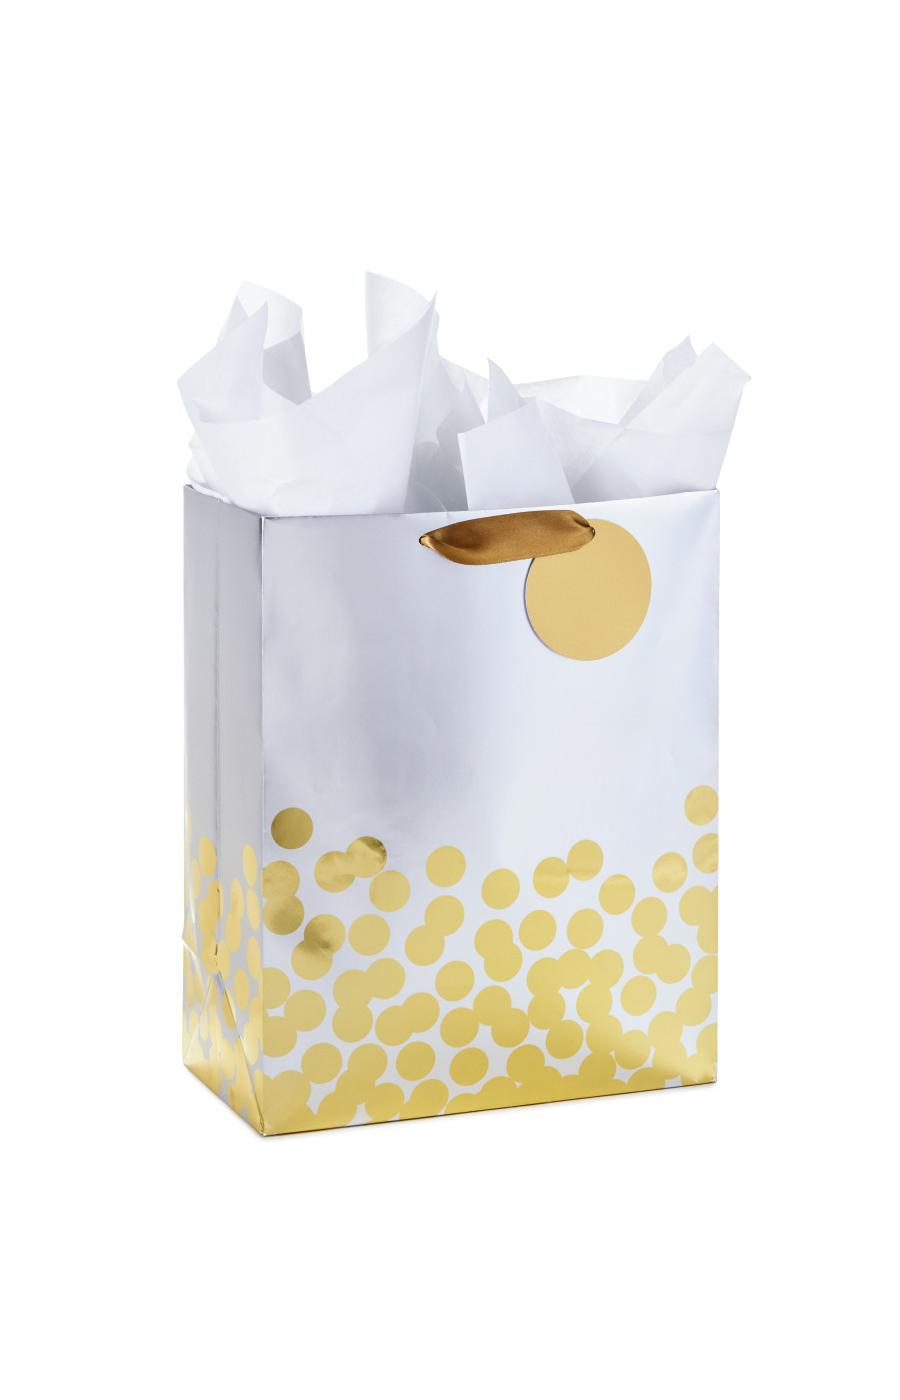 GIFT BAG WITH TISSUE PAPER!